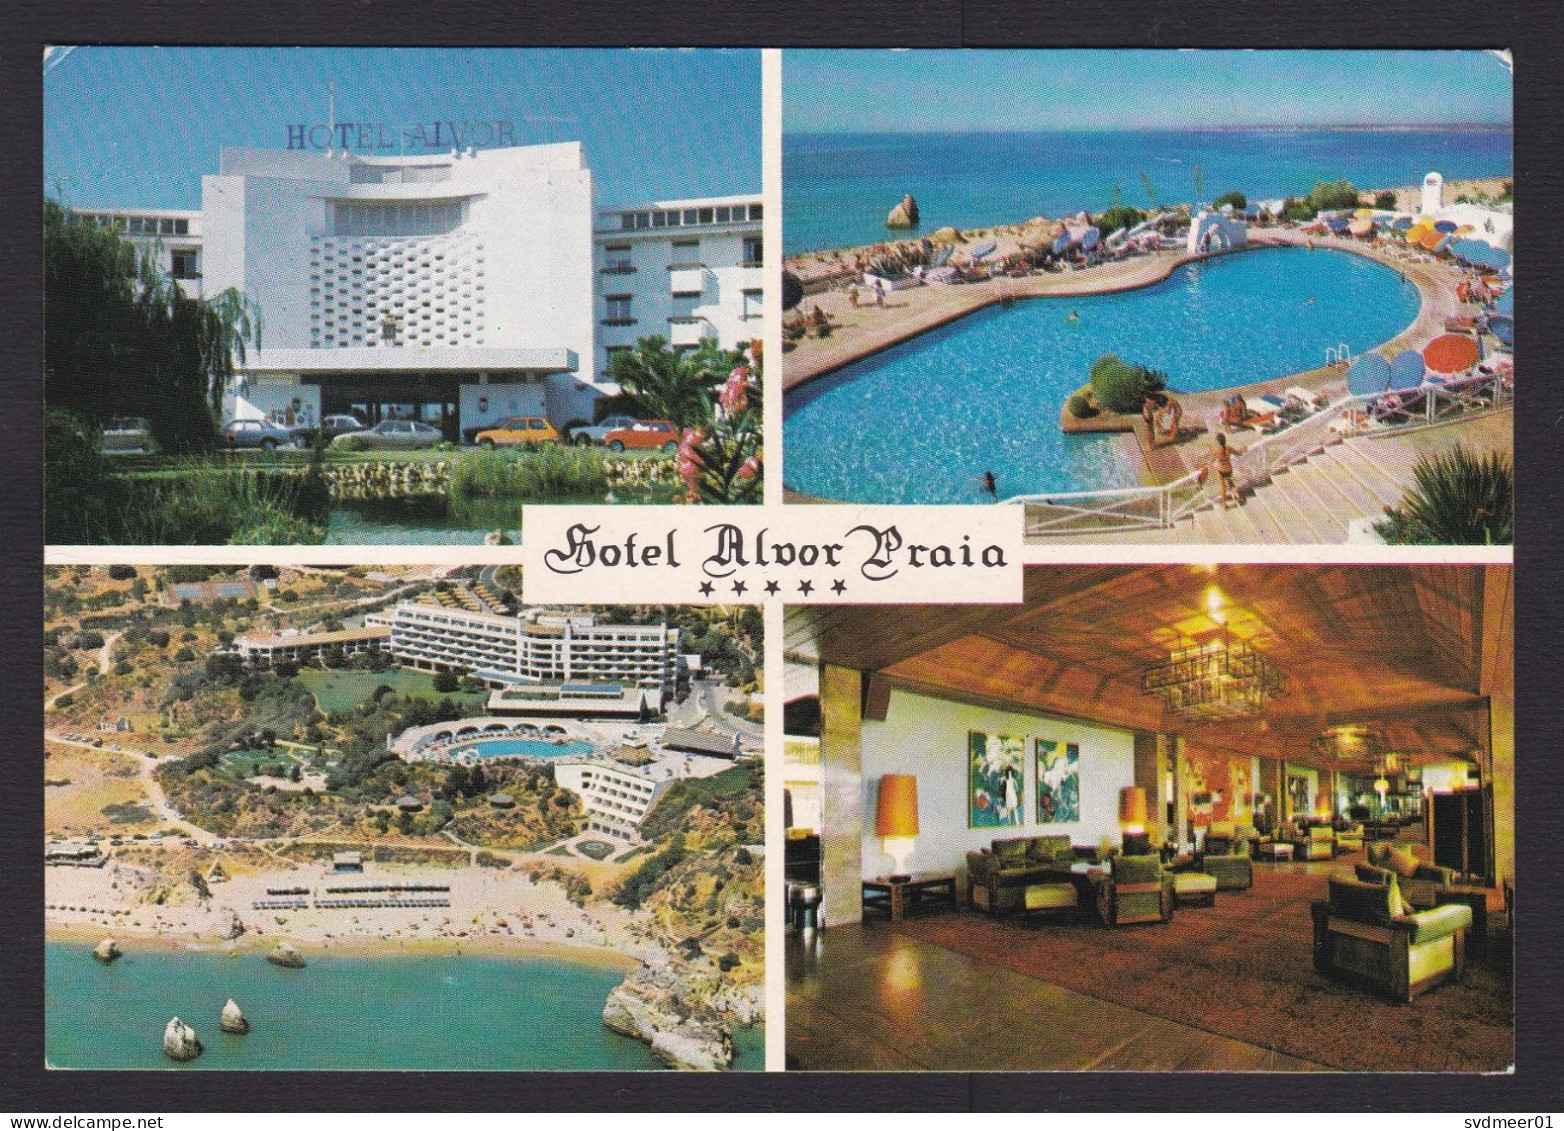 Portugal: Picture Postcard To Germany, 1980s, 2 Stamps, Construction, Card: Hotel Alvor Praia, Portimao (traces Of Use) - Briefe U. Dokumente